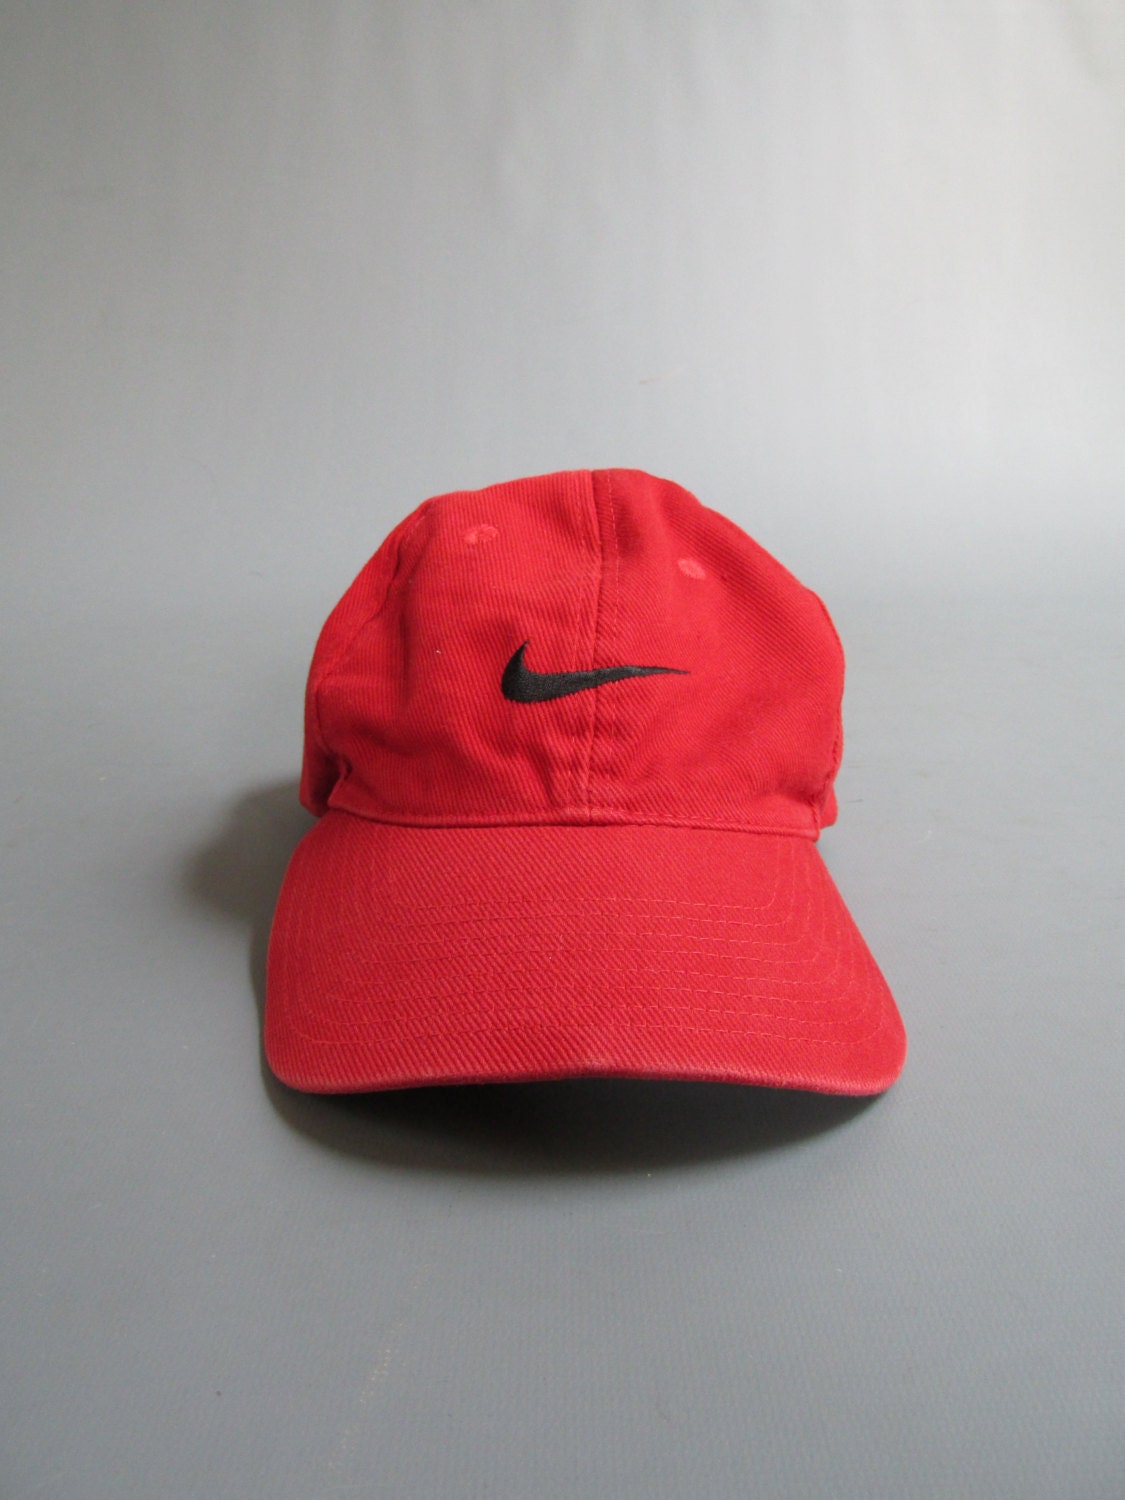 90s Nike Swoosh Faded Red Snapback Hat – One Size Most – Vintage Nike ...